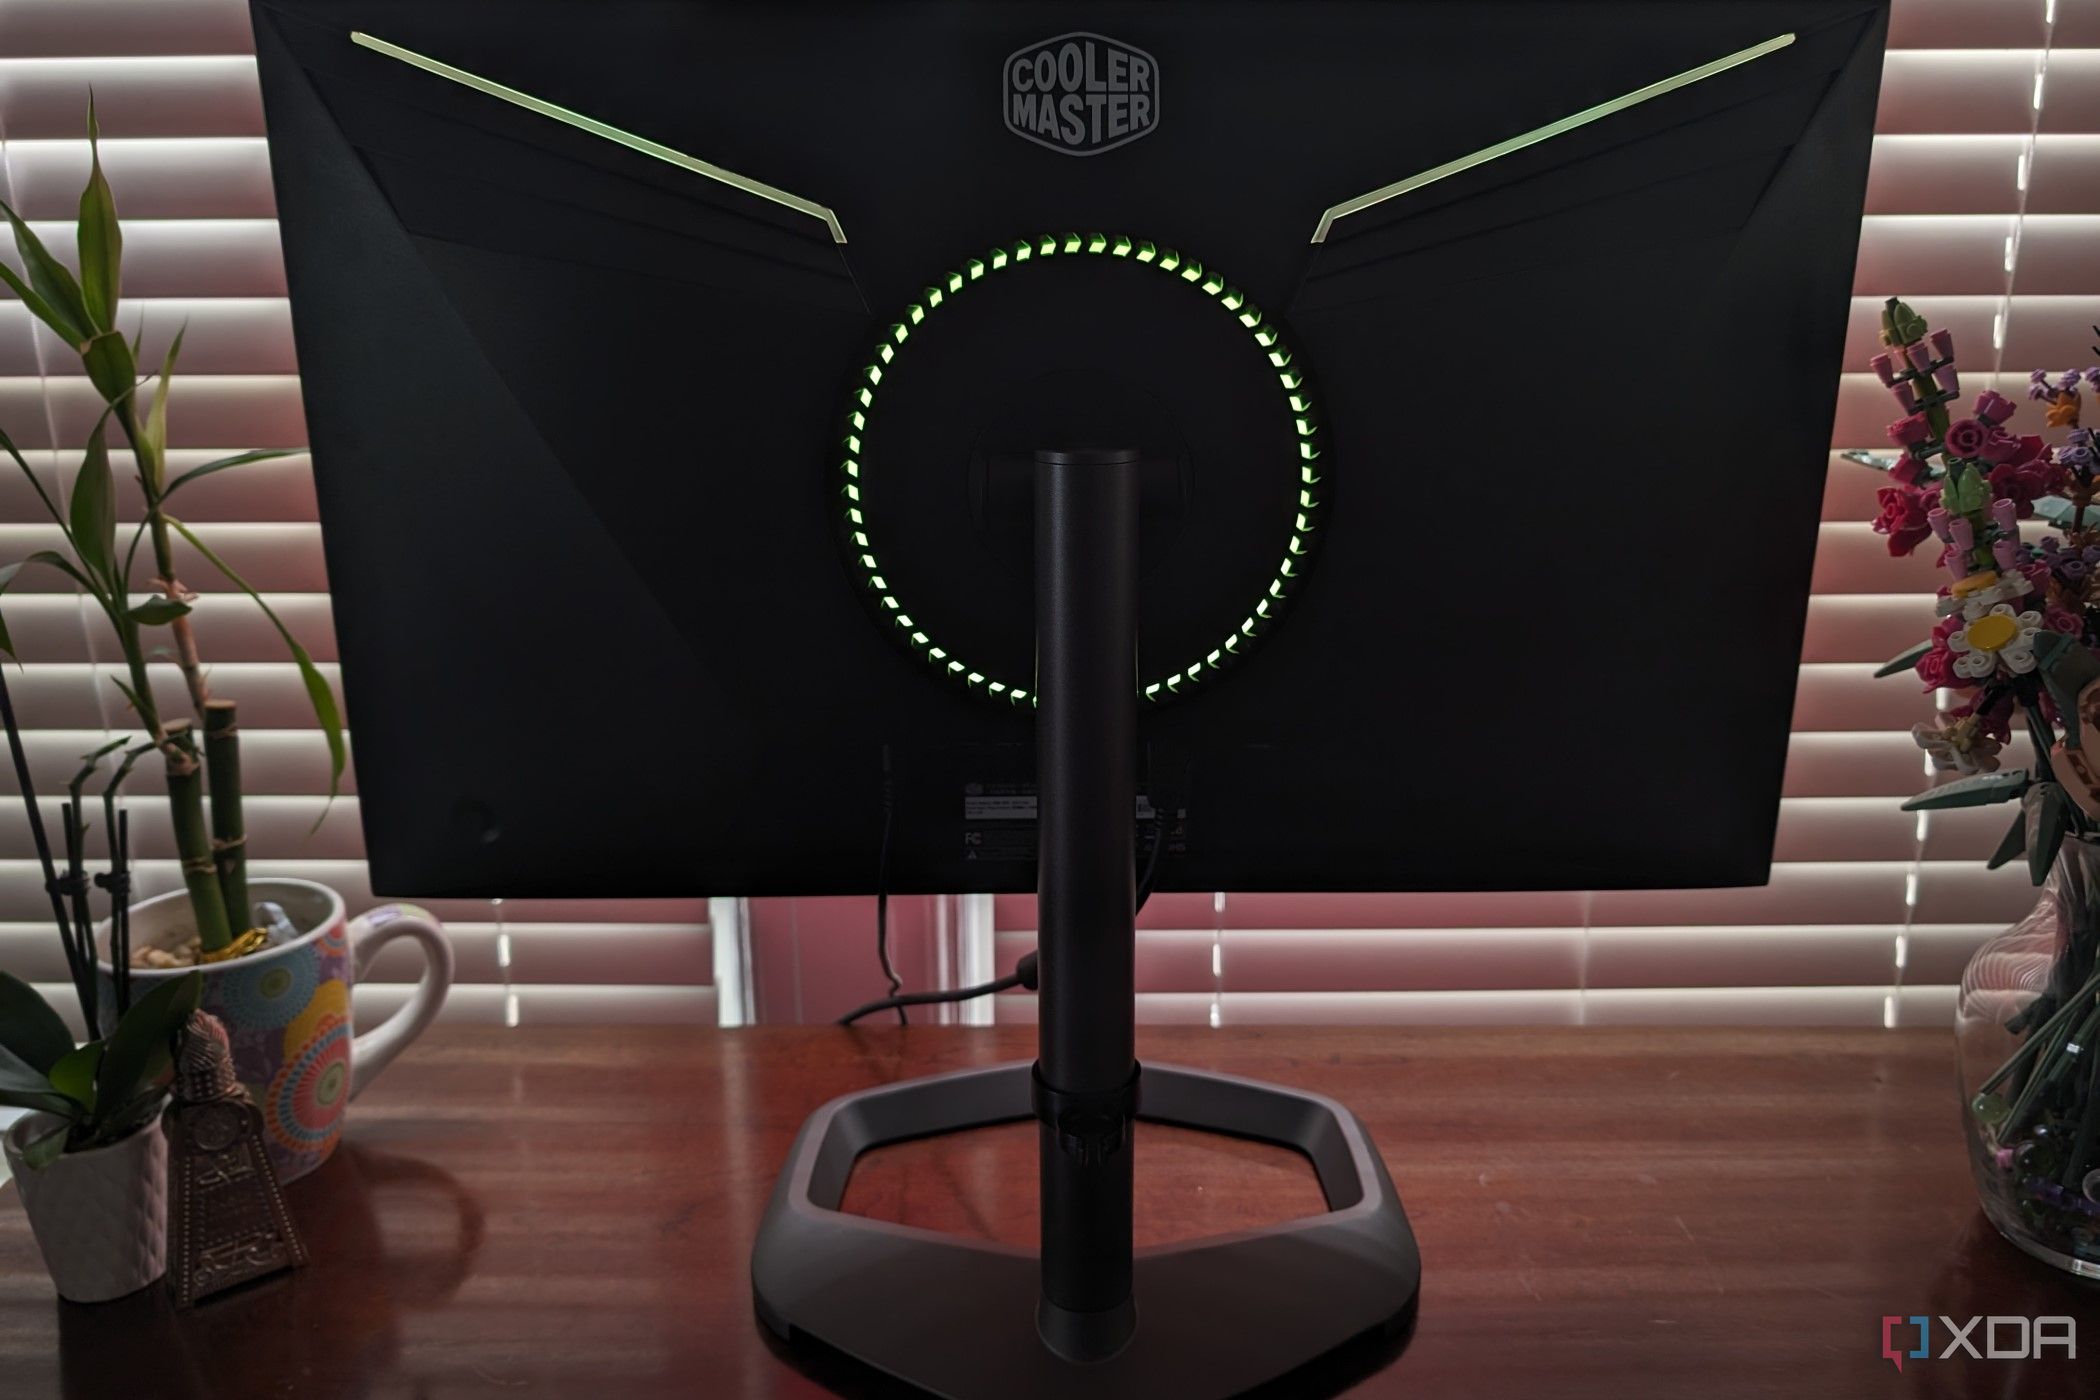 Cooler Master Tempest GP27Q monitor review: Mini-LED to light up your games